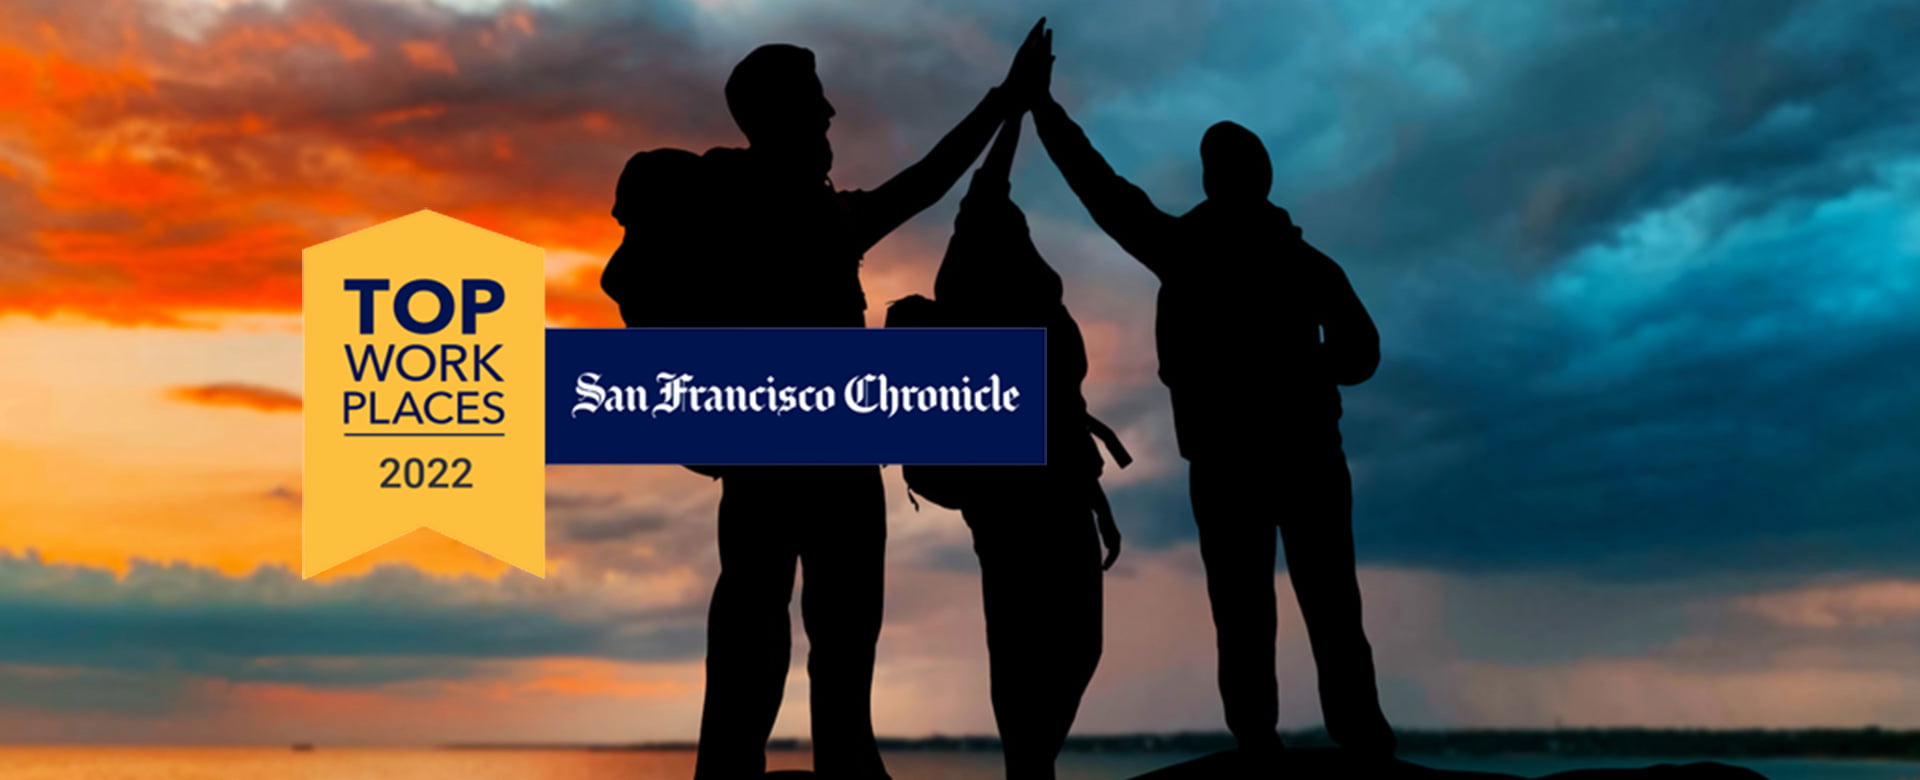 SAN FRANCISCO CHRONICLE NAMES ROSERYAN A WINNER OF THE GREATER BAY AREA